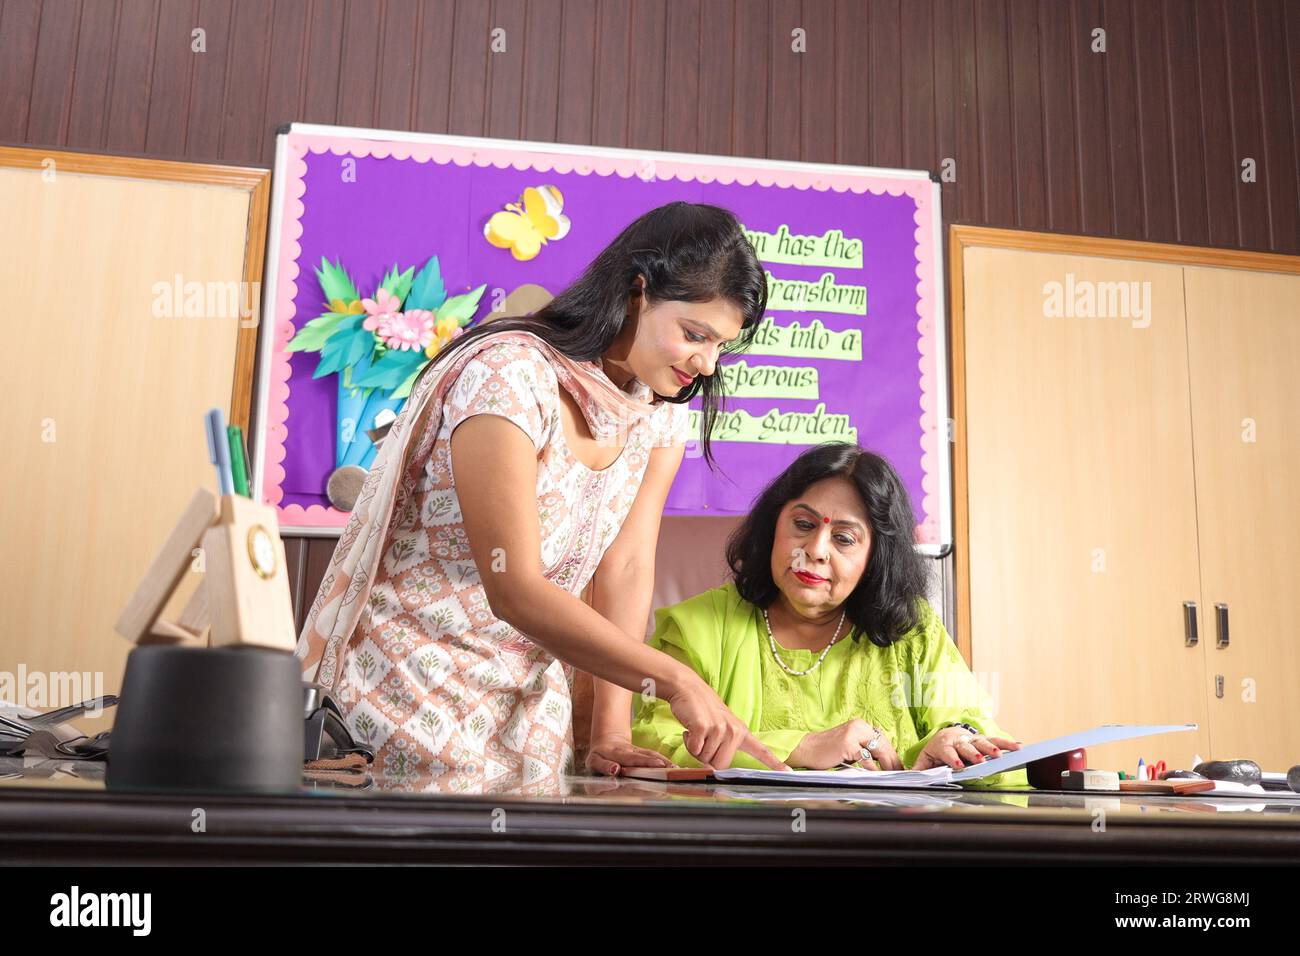 School Principal mam checking some important documents in a file with her personal assistant, discussion, signing the documents, progress in education Stock Photo